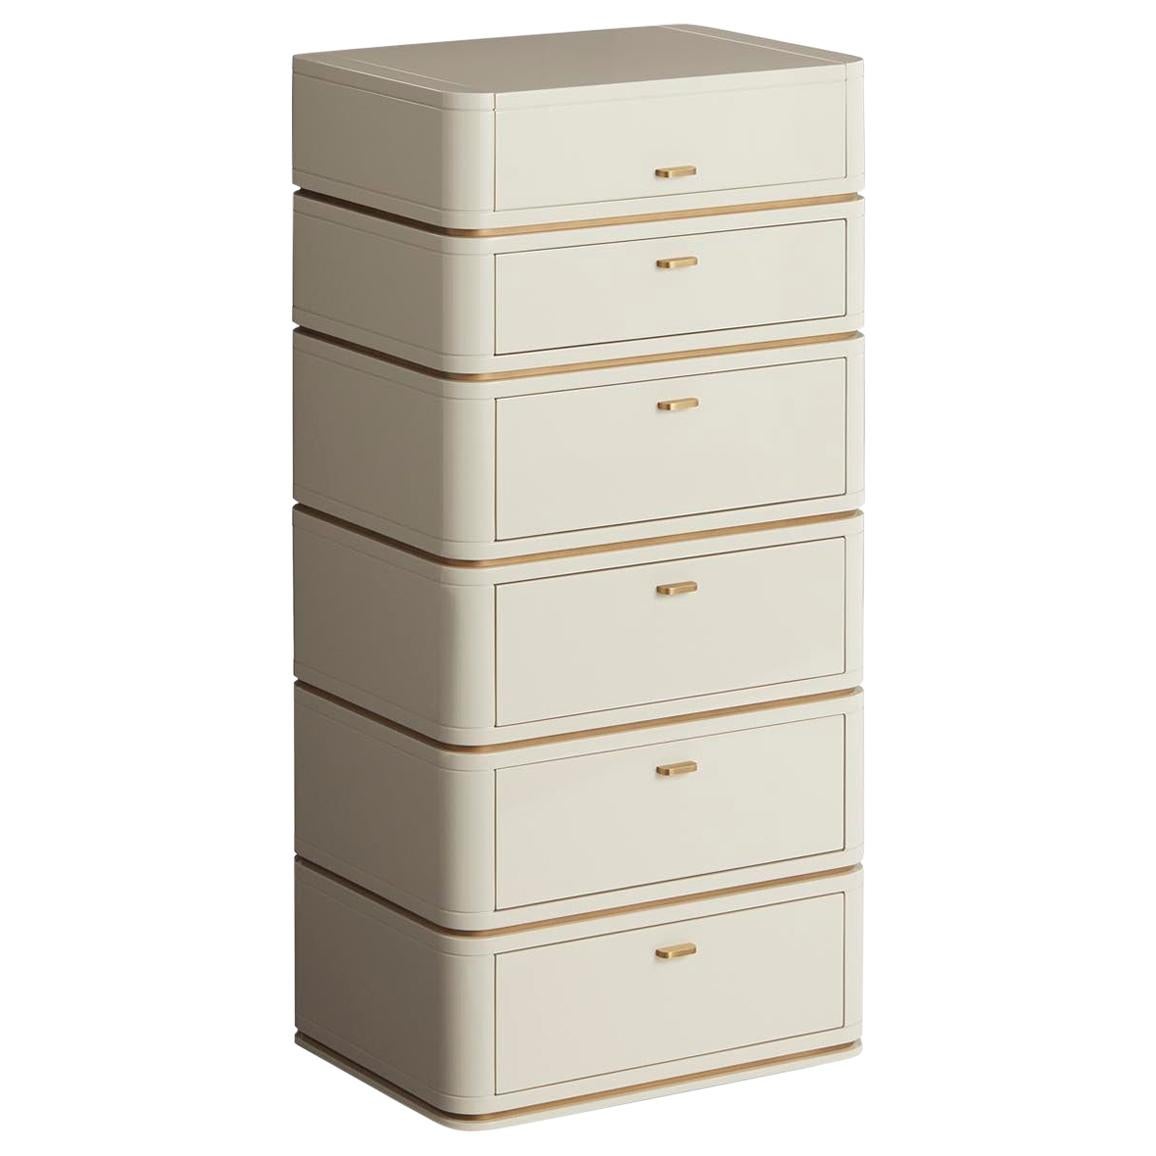 CRIS Tallboy in custom colors with Antique Brass handles